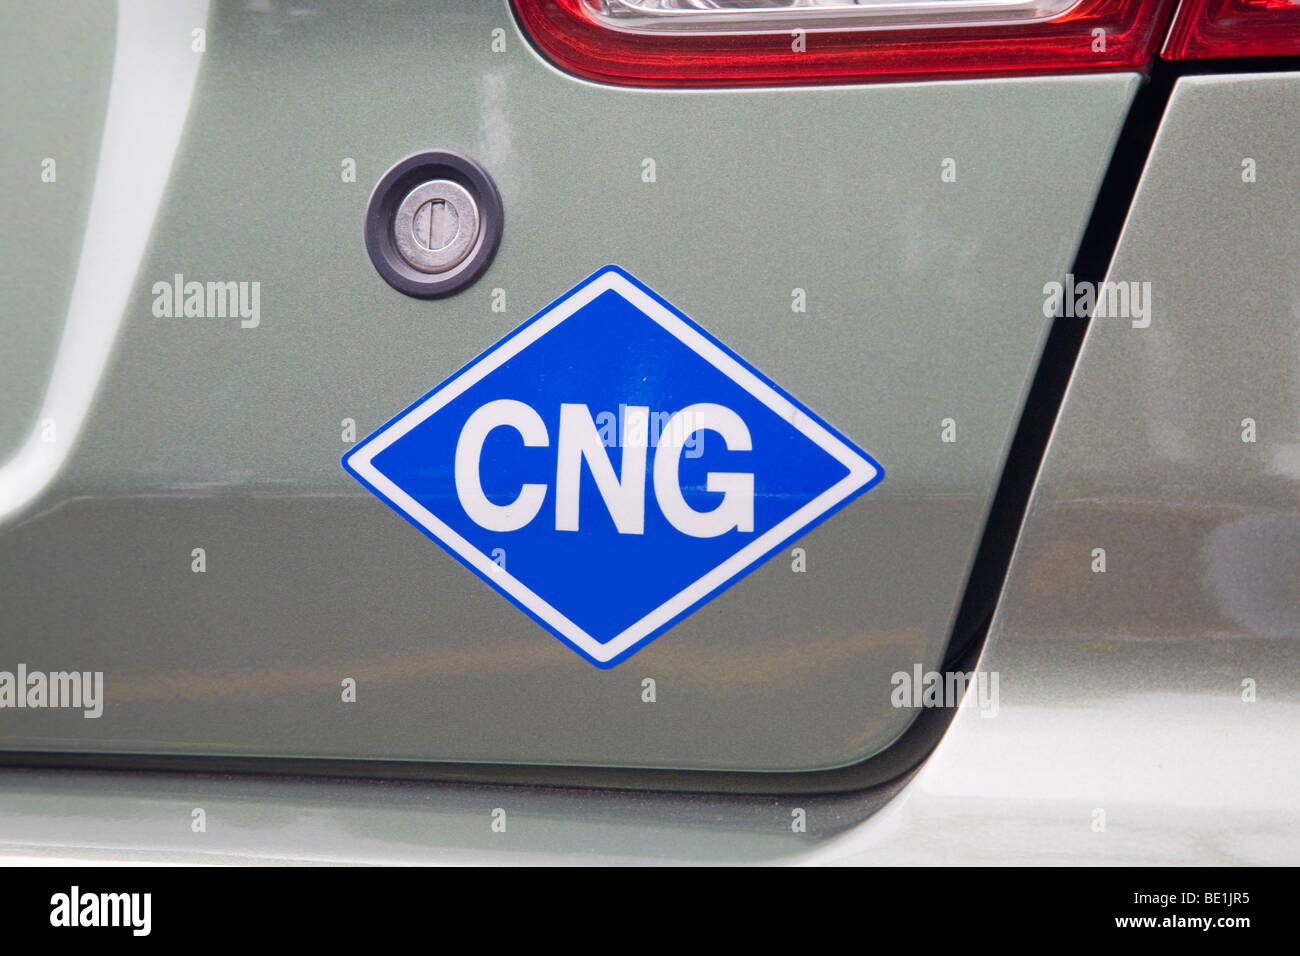 A close up of CNG natural gas) stickers on a Honda Civic